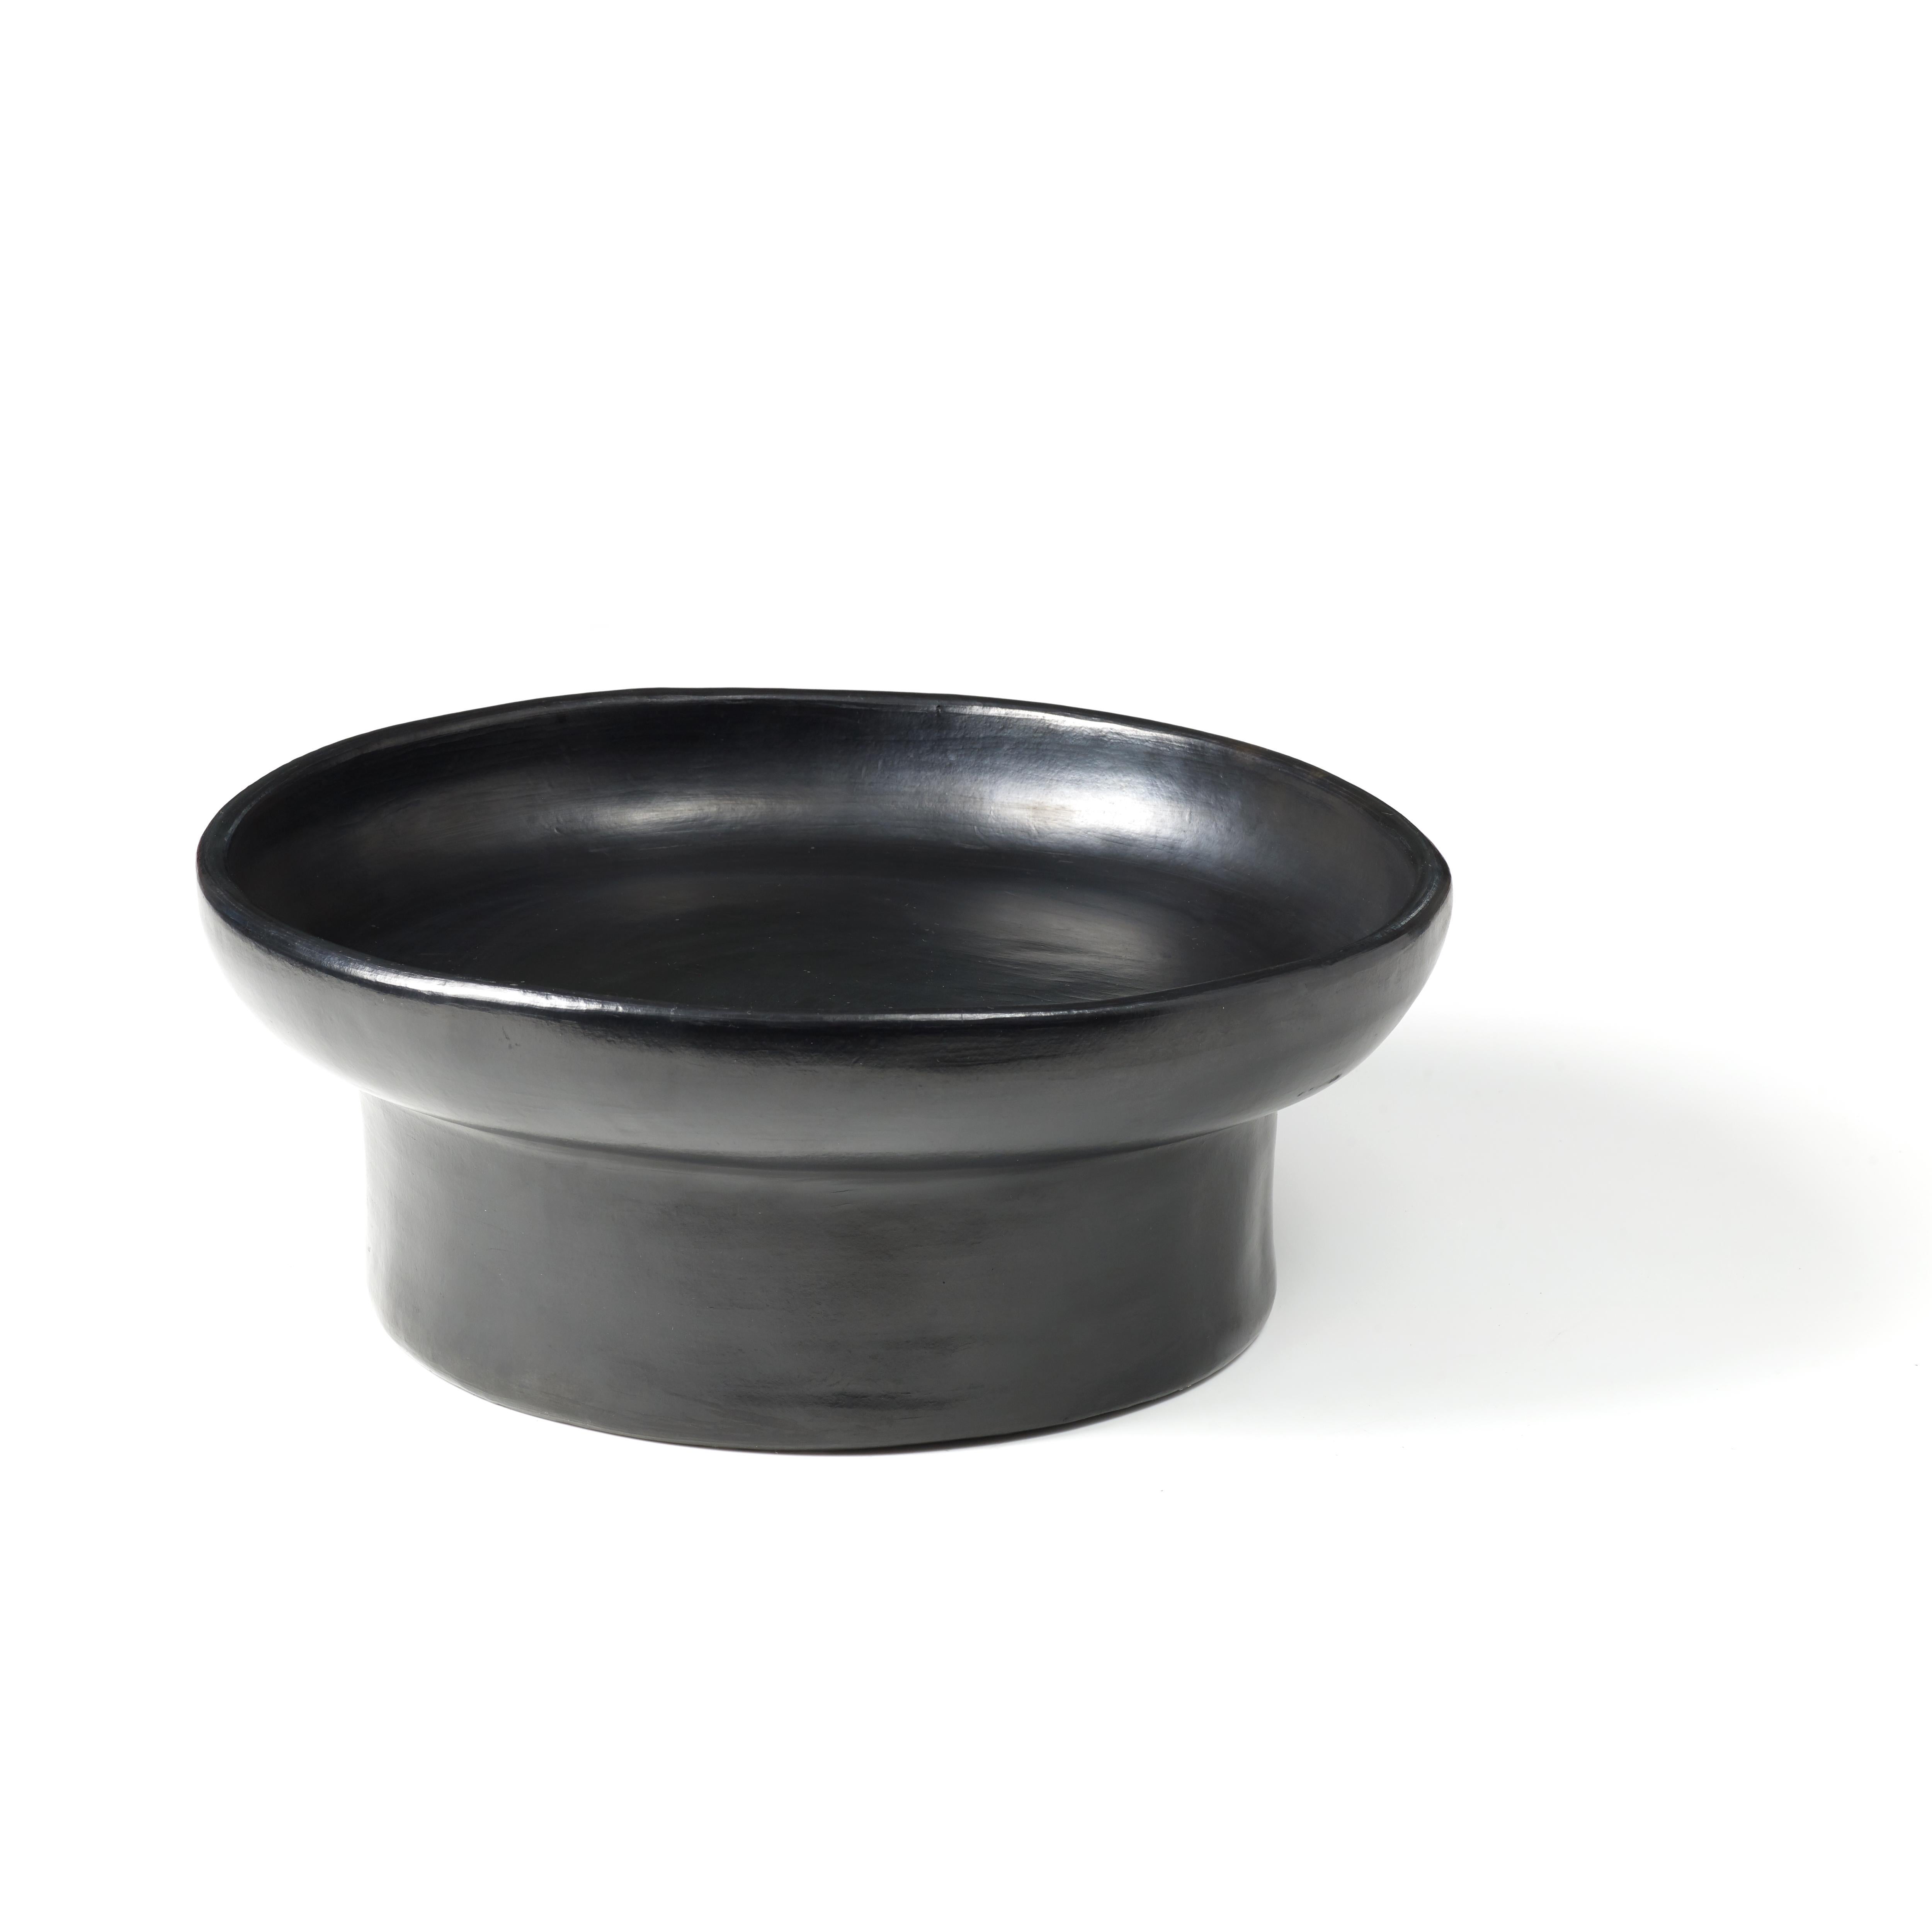 Small tray 2 by Sebastian Herkner
Materials: Heat-resistant black ceramic. 
Technique: Glazed. Oven cooked and polished with semi-precious stones. 
Dimensions: Diameter 32 cm x height 10 cm 
Available in sizes large and mini. 

This pot